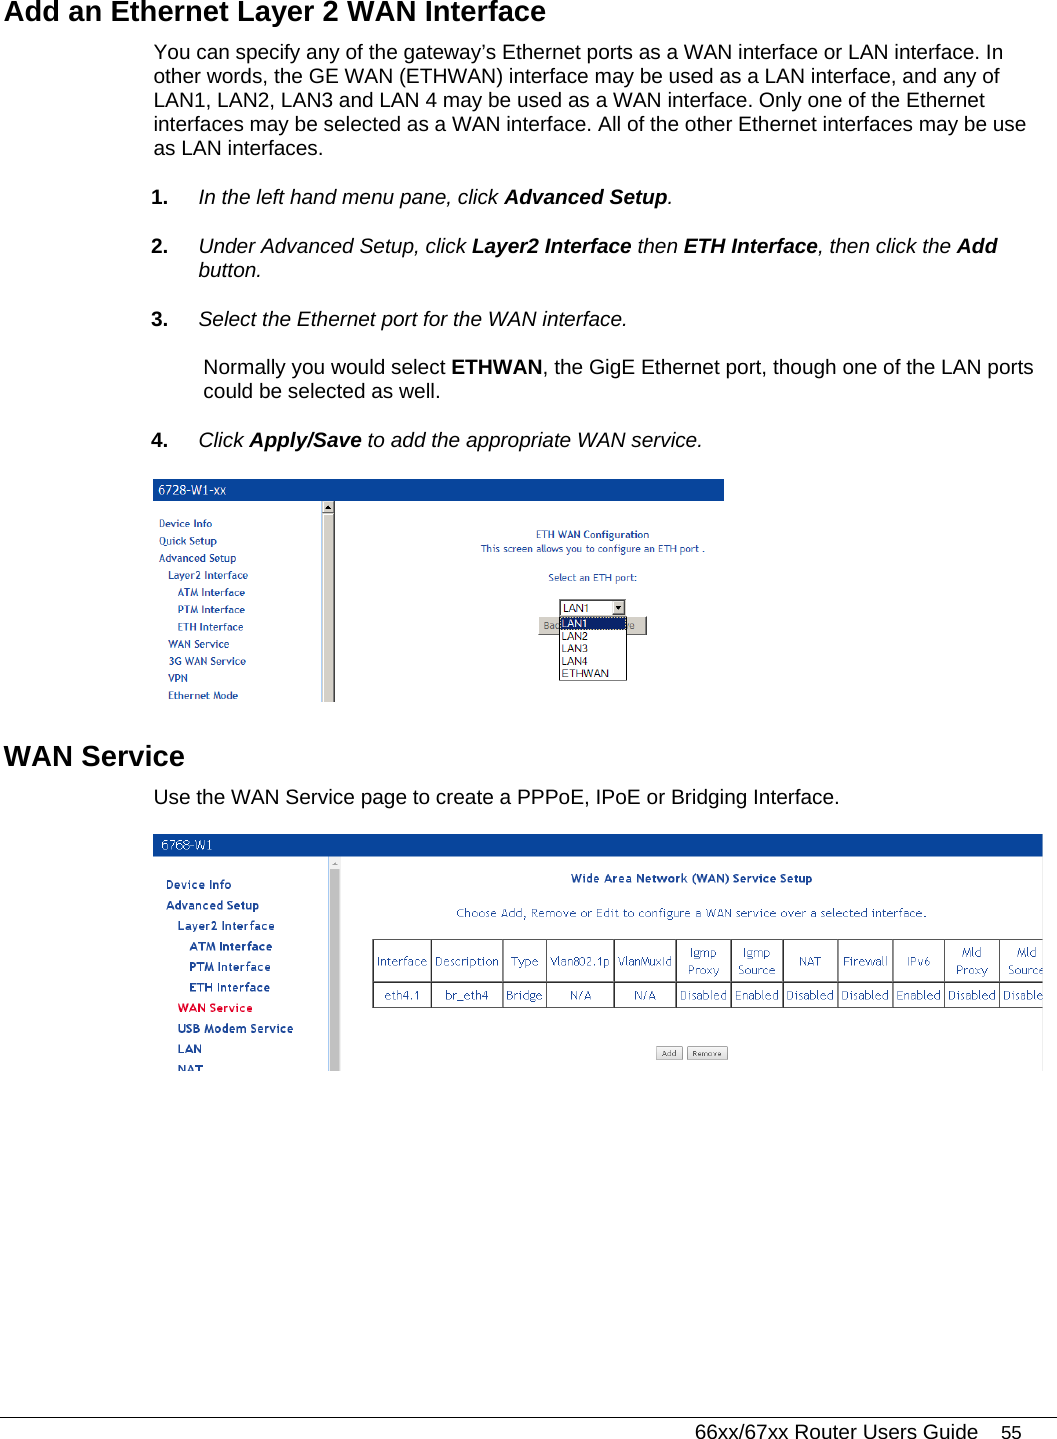   66xx/67xx Router Users Guide 55 Add an Ethernet Layer 2 WAN Interface  You can specify any of the gateway’s Ethernet ports as a WAN interface or LAN interface. In other words, the GE WAN (ETHWAN) interface may be used as a LAN interface, and any of LAN1, LAN2, LAN3 and LAN 4 may be used as a WAN interface. Only one of the Ethernet interfaces may be selected as a WAN interface. All of the other Ethernet interfaces may be use as LAN interfaces. 1.  In the left hand menu pane, click Advanced Setup. 2.  Under Advanced Setup, click Layer2 Interface then ETH Interface, then click the Add button. 3.  Select the Ethernet port for the WAN interface.  Normally you would select ETHWAN, the GigE Ethernet port, though one of the LAN ports could be selected as well. 4.  Click Apply/Save to add the appropriate WAN service.  WAN Service Use the WAN Service page to create a PPPoE, IPoE or Bridging Interface.  